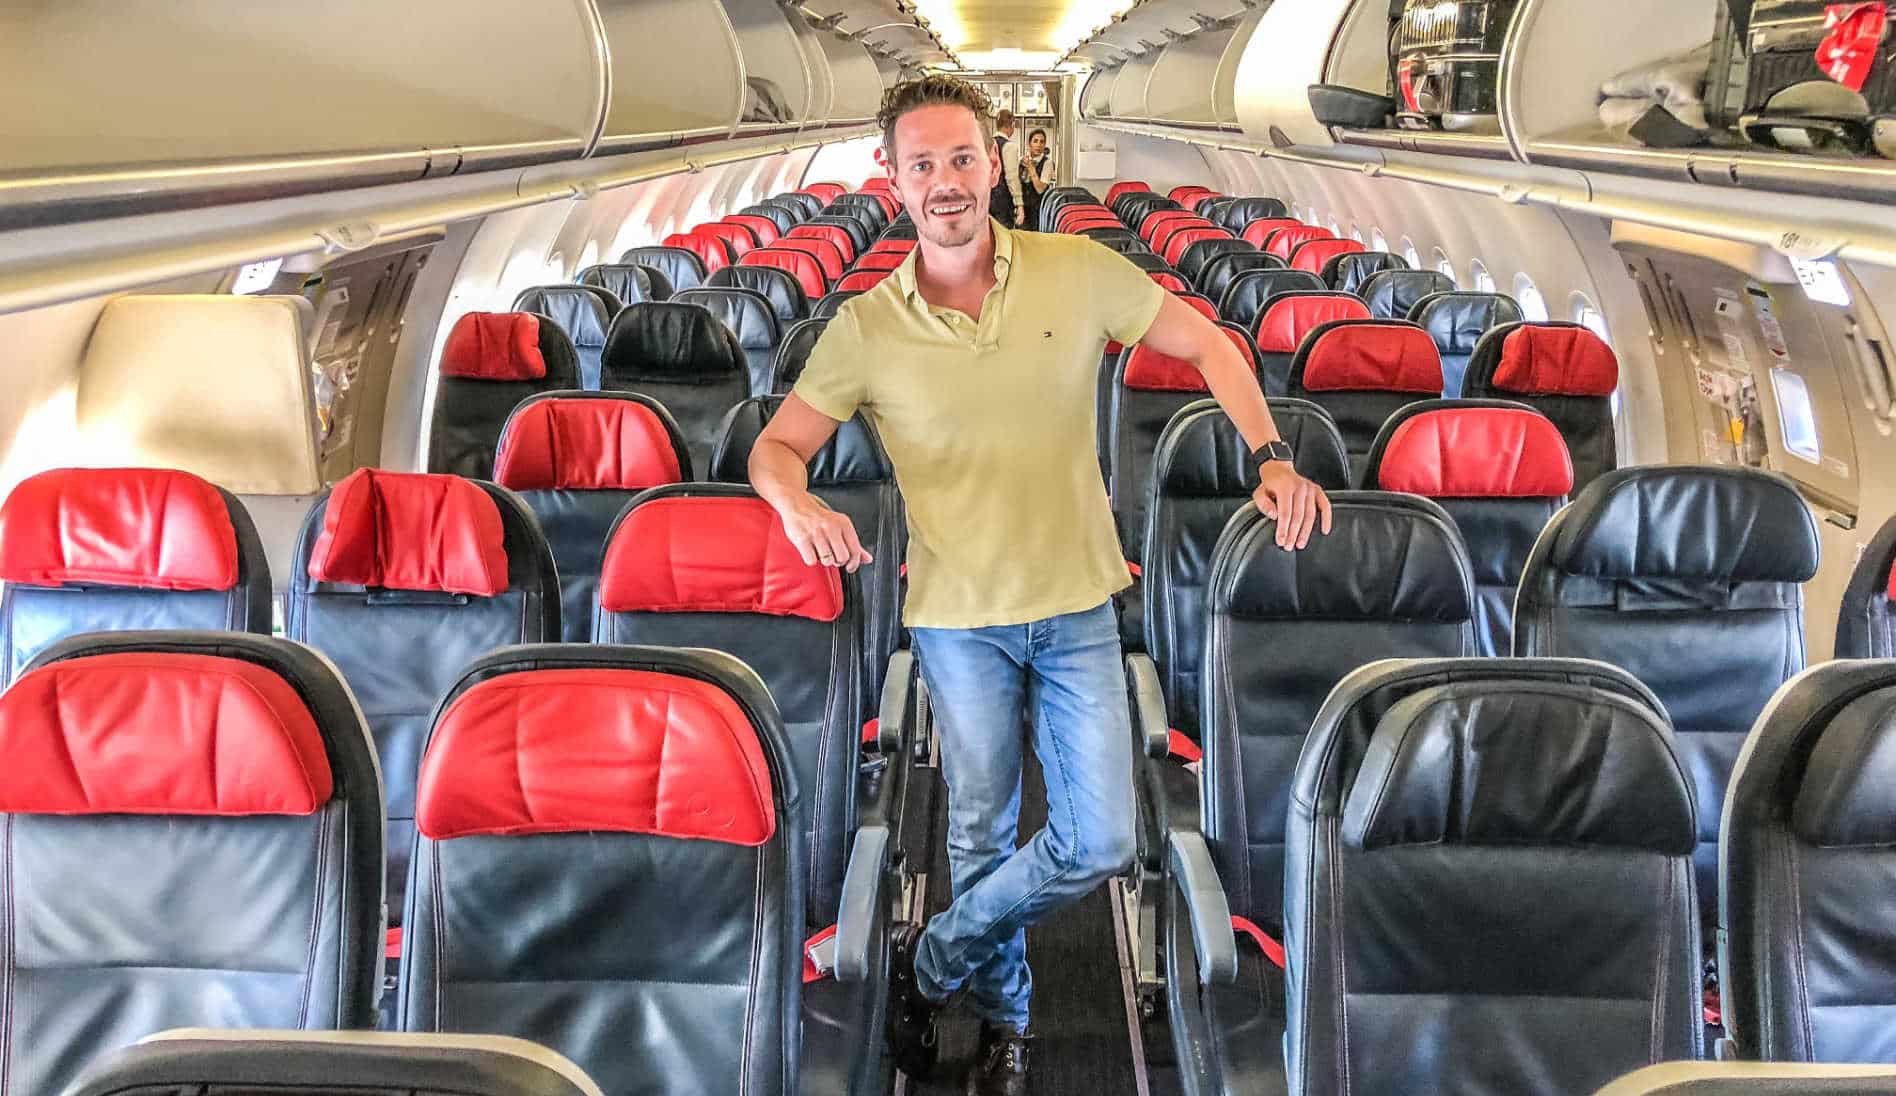 Turkish Airlines Economy Class